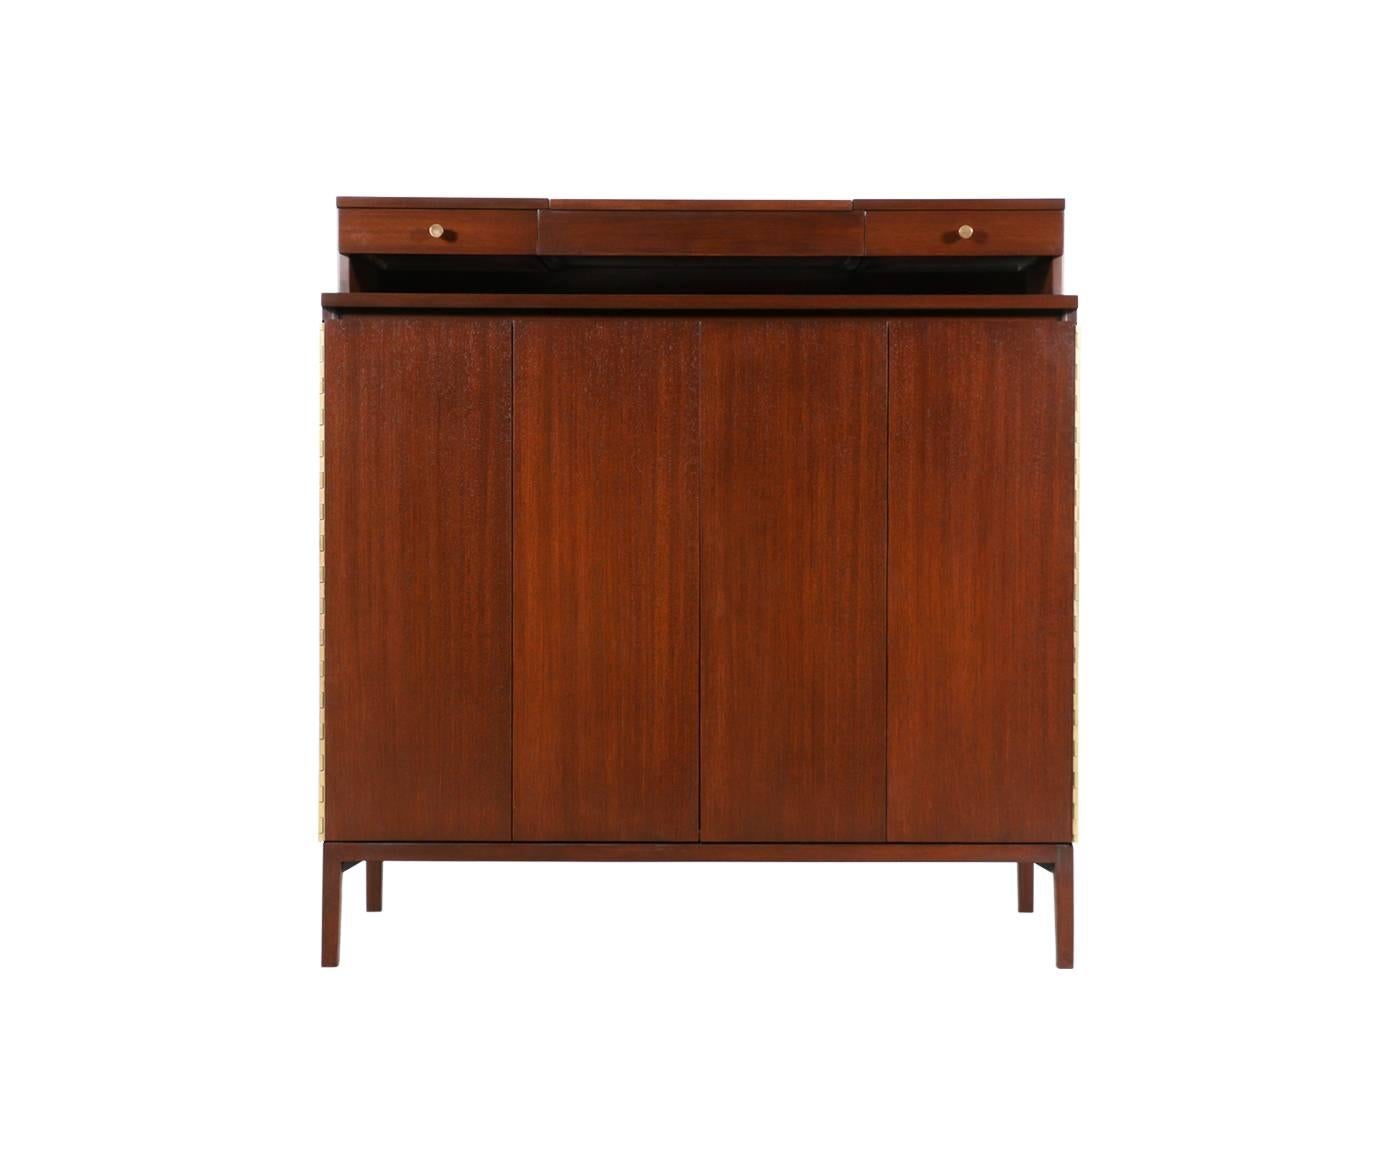 Designer: Paul McCobb.
Manufacturer: Calvin Group “Irwin Collection.”
Period/Style: Mid-Century Modern.
Country: United States.
Date: 1950s.

Dimensions: 49.75″ H x 48″ W x 19″ D.
Materials: Mahogany, brass.
Condition: Excellent – newly